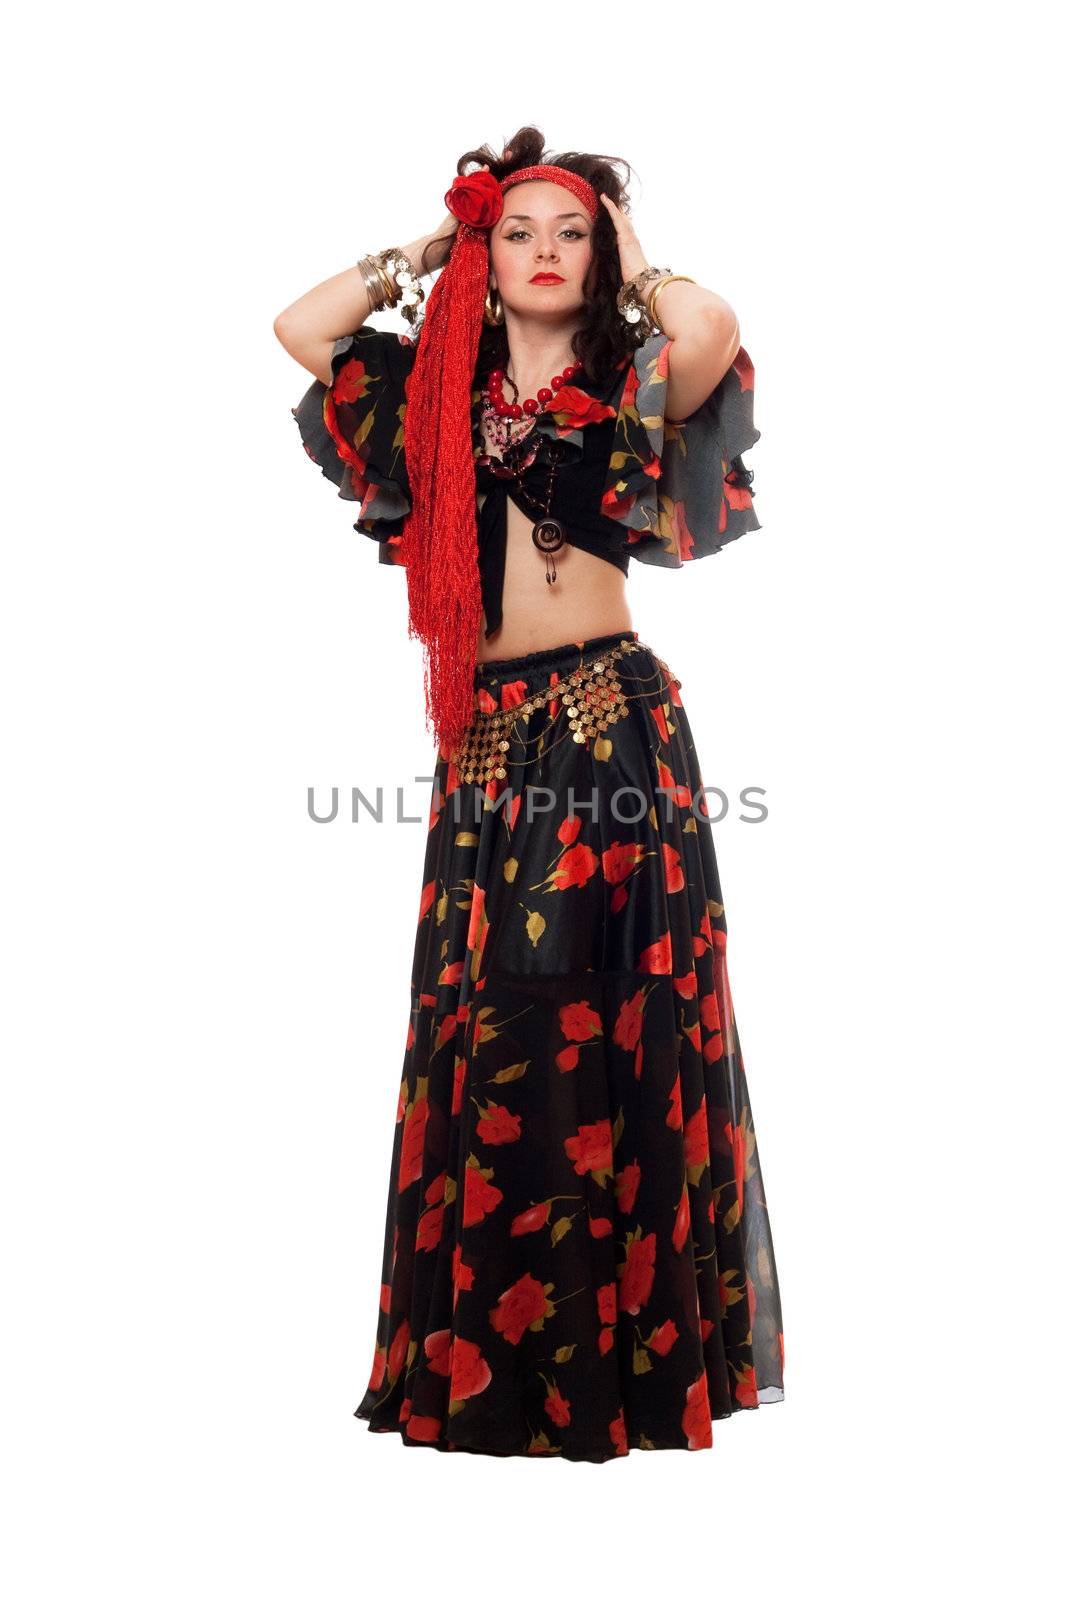 Gypsy woman in a black skirt. Isolated by acidgrey